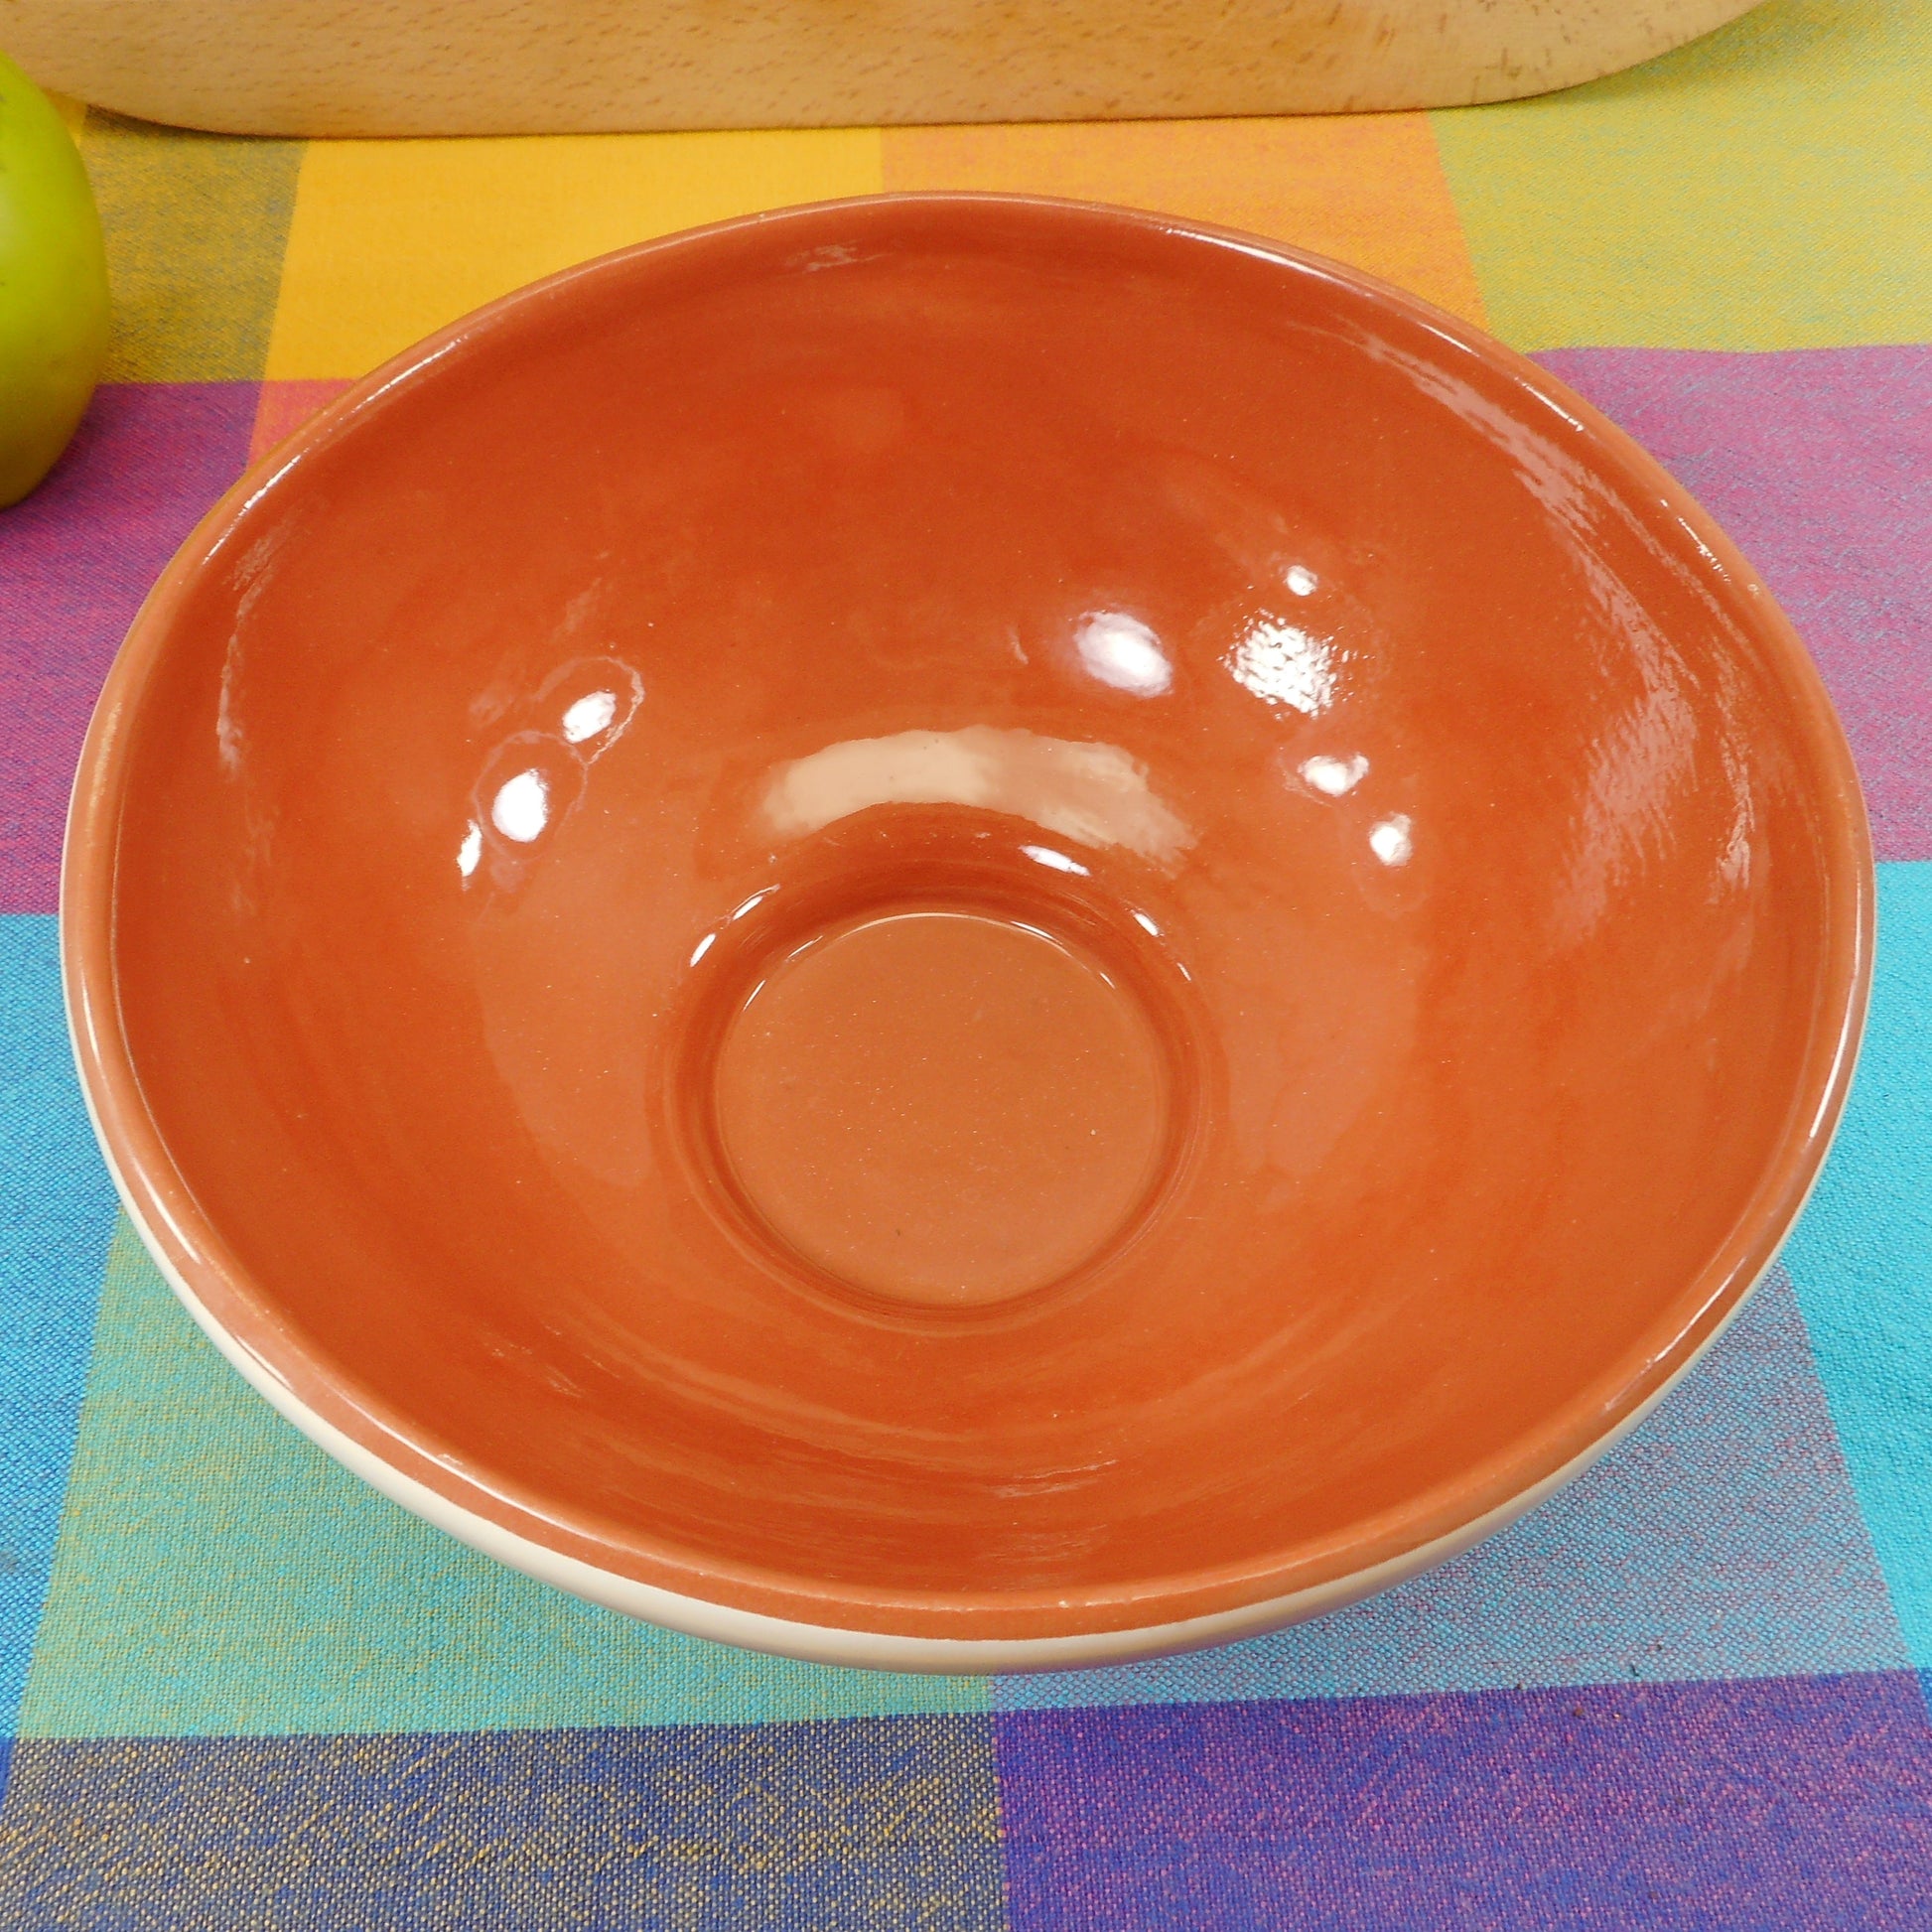 Ruth Price Pottery Pennsylvania Dutch Amish Mottoware Bowl - What Does it Give Pretzels or What? Red Clay